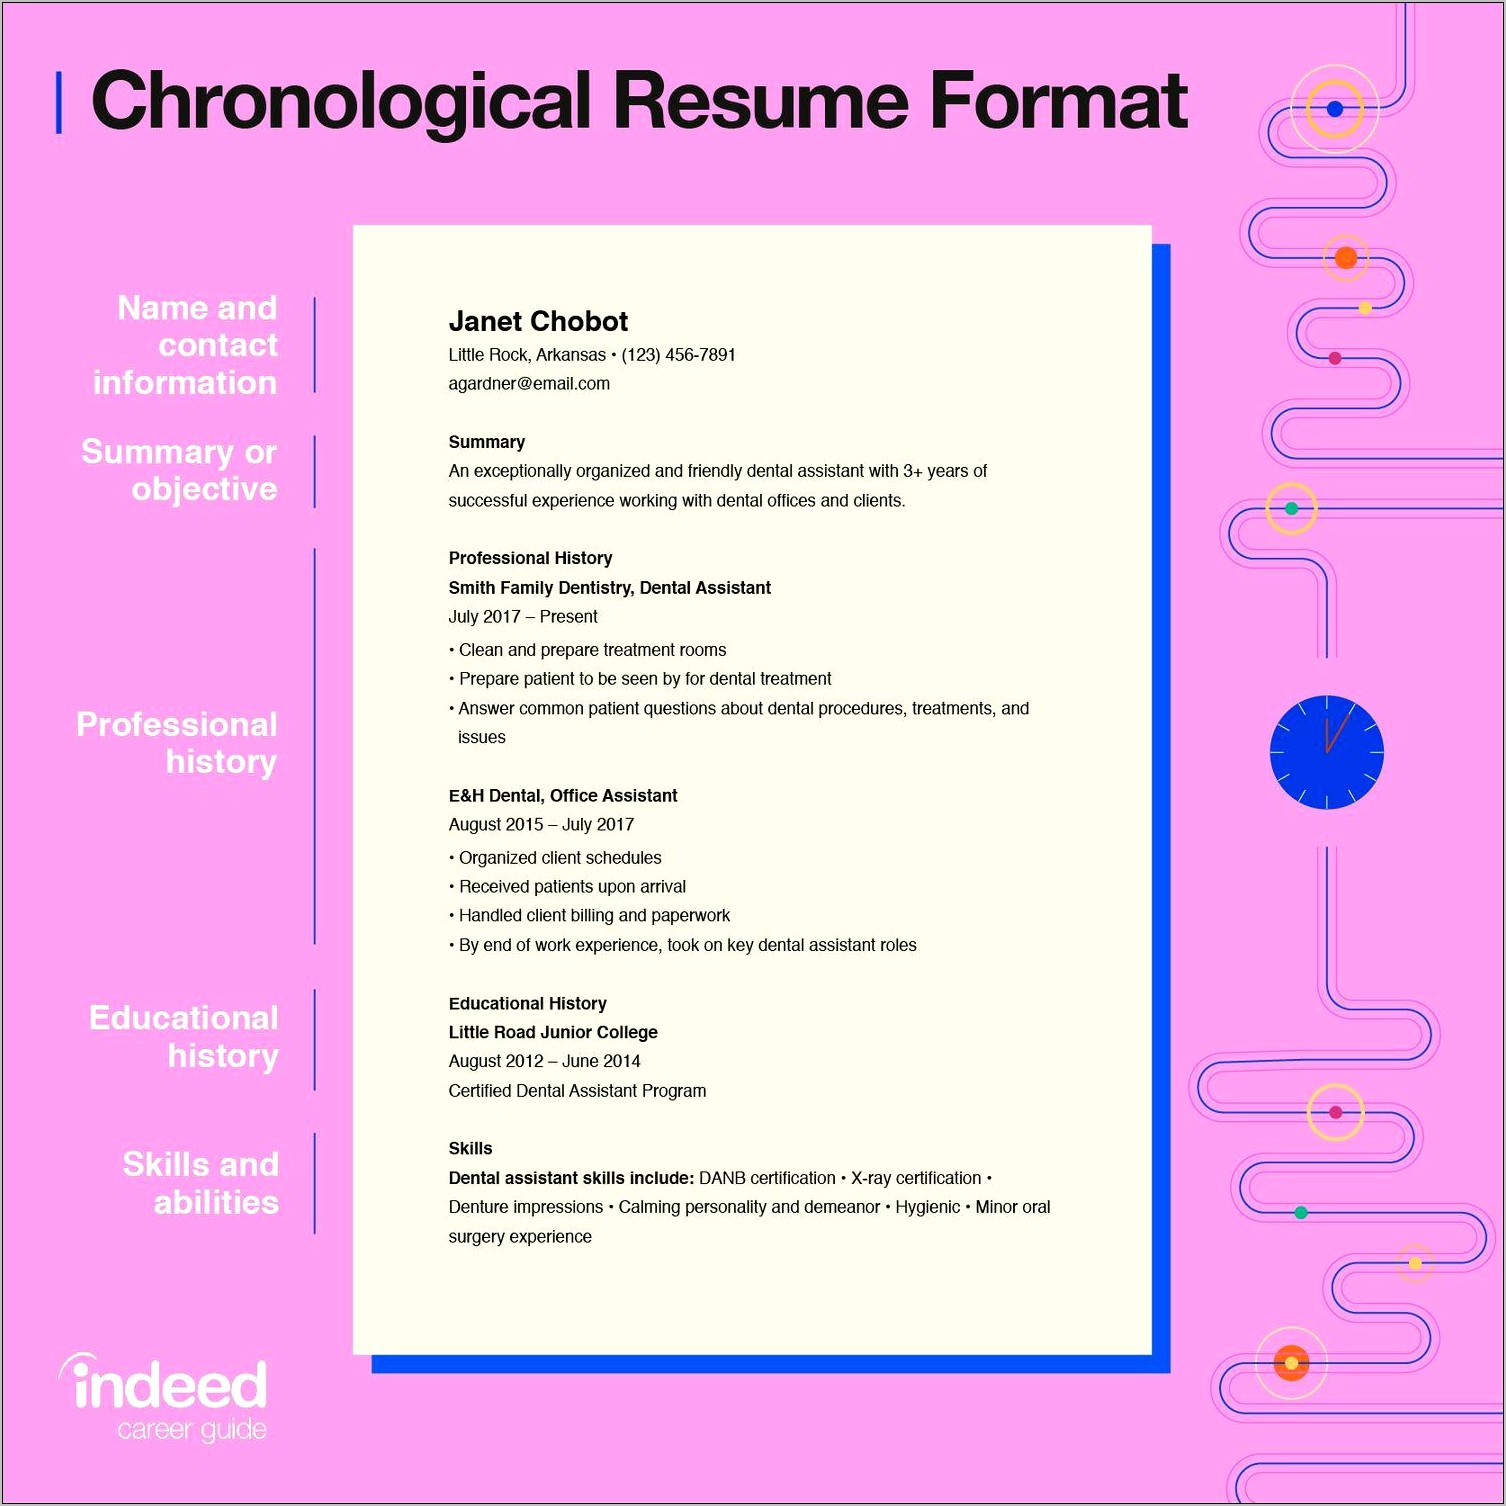 Resume Skill Compose Customer Review Email